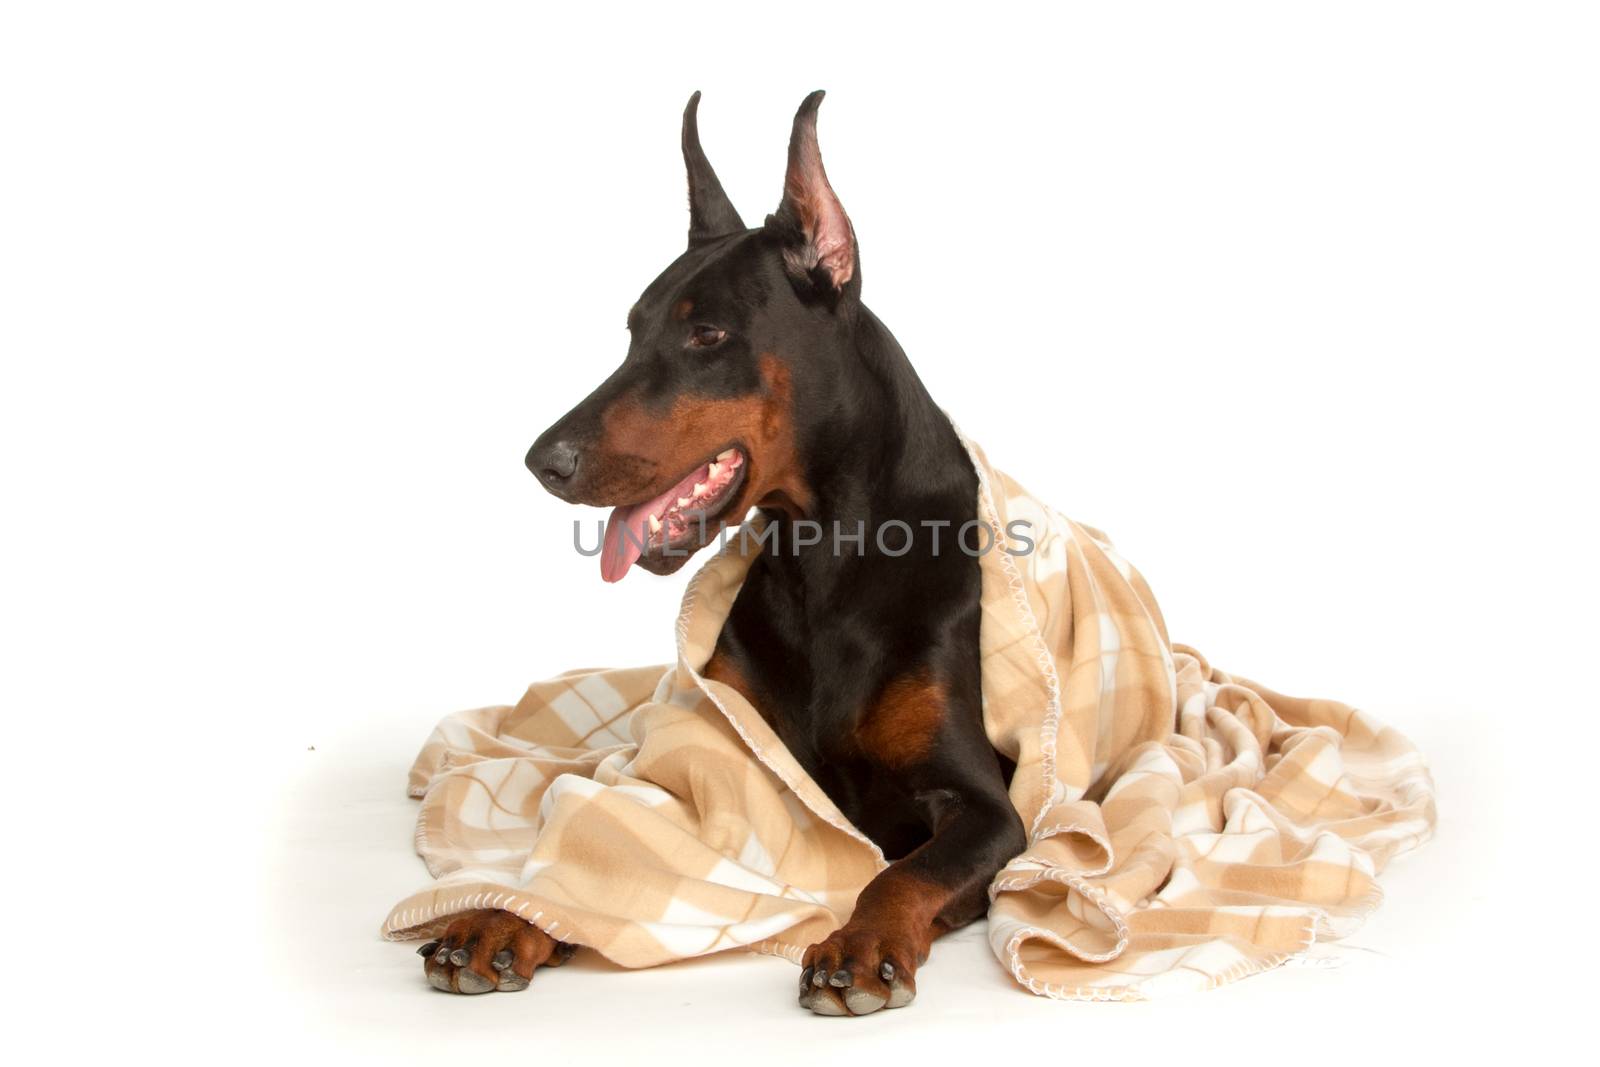 Very sick dog under a blanket, isolated on white